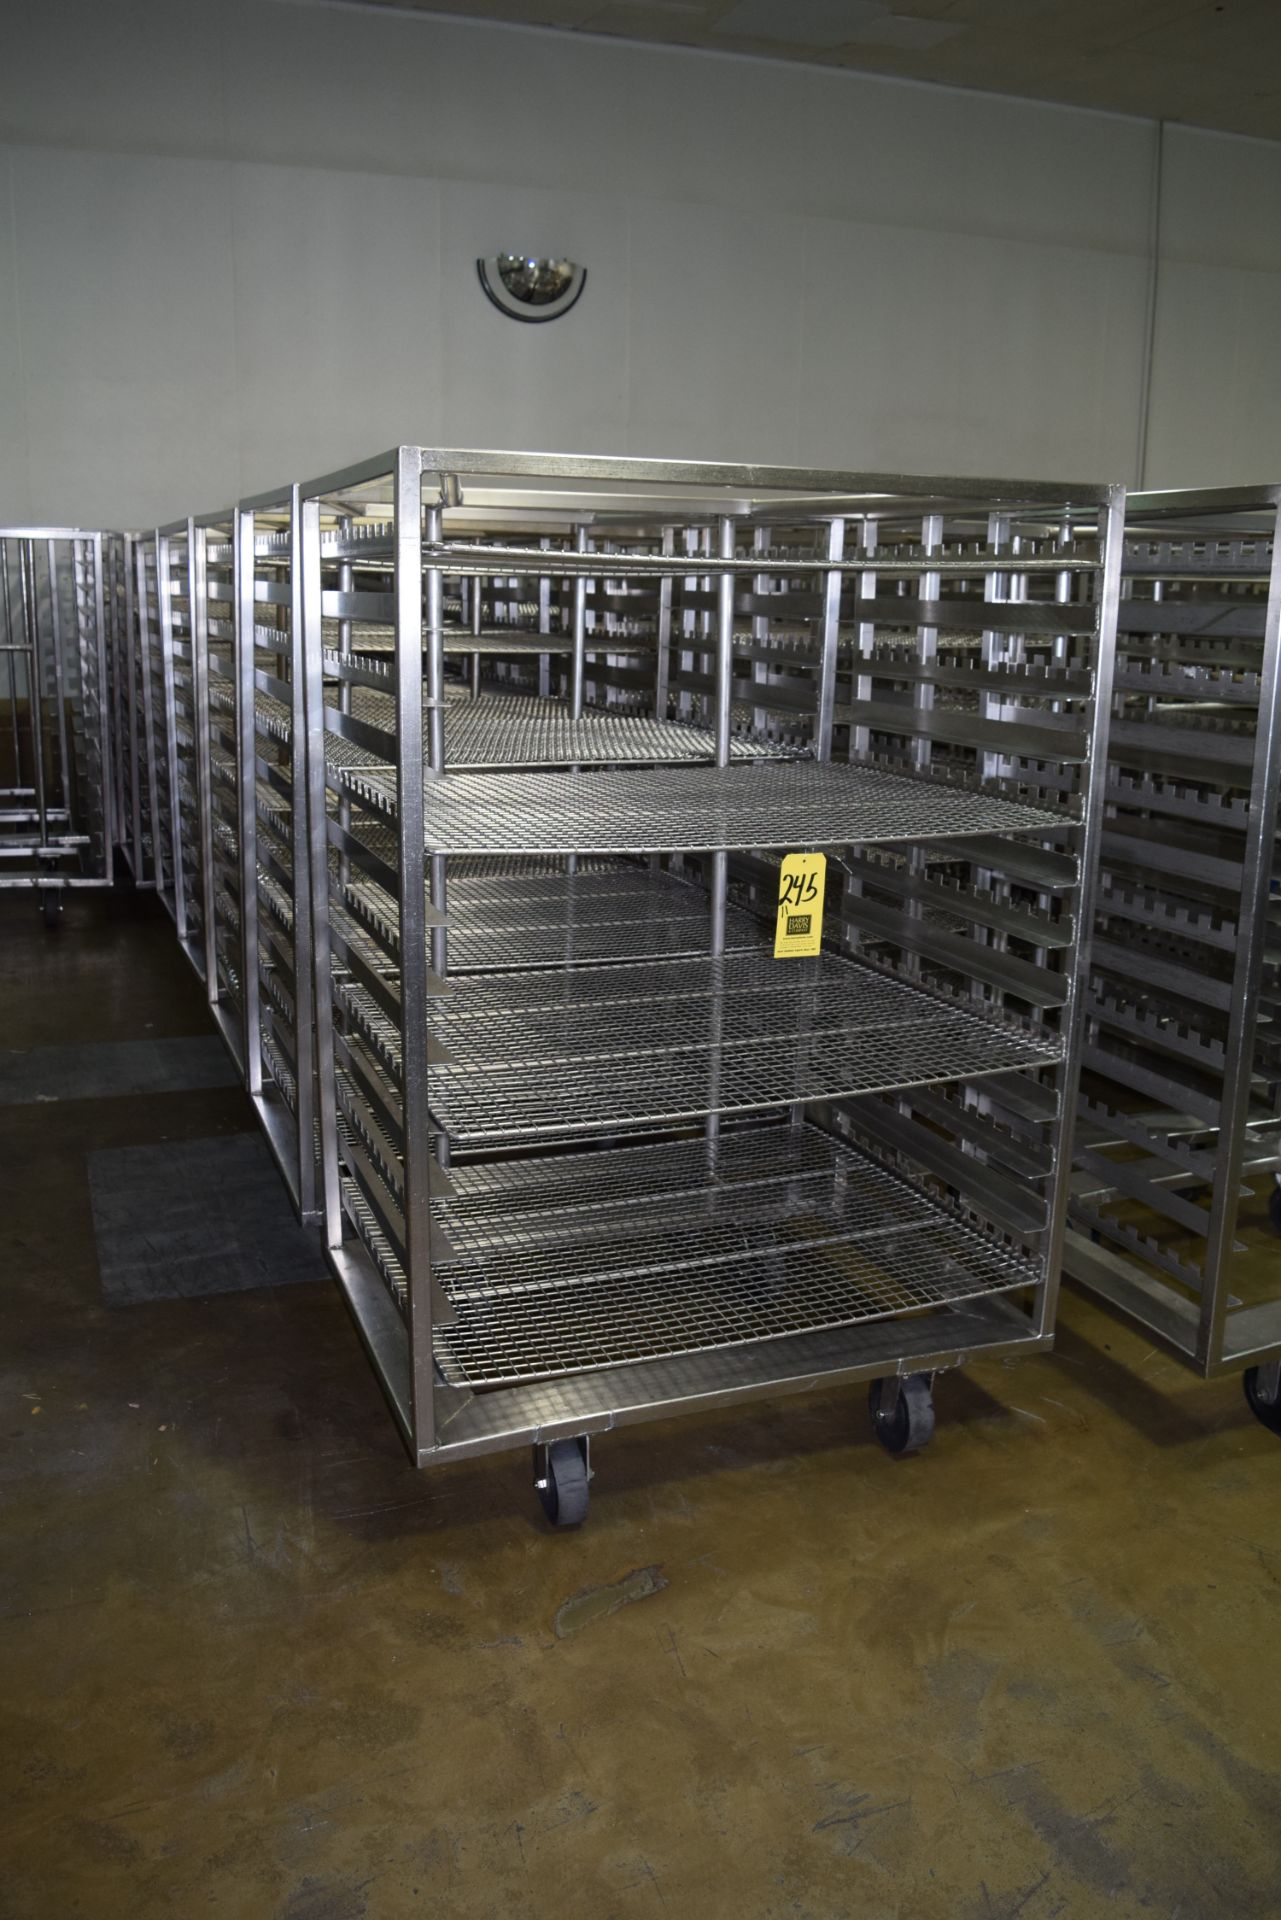 S/S Meat Carts, Mounted on Casters